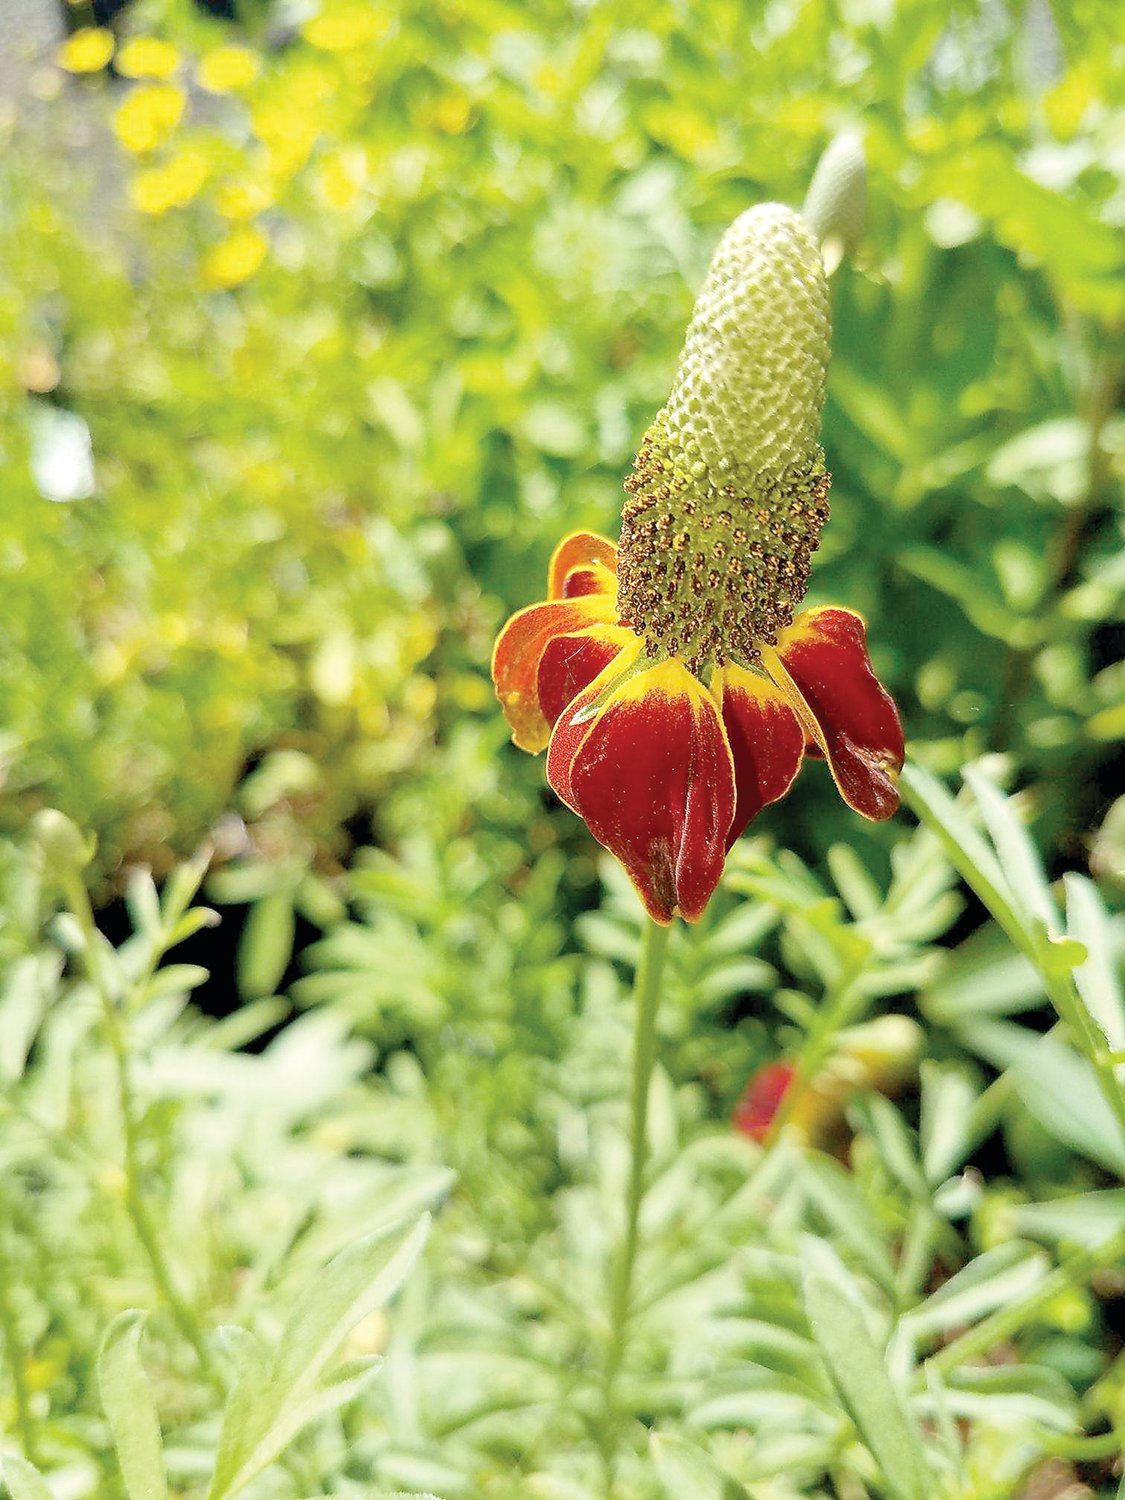 The Mexican hat flower is a native perennial.